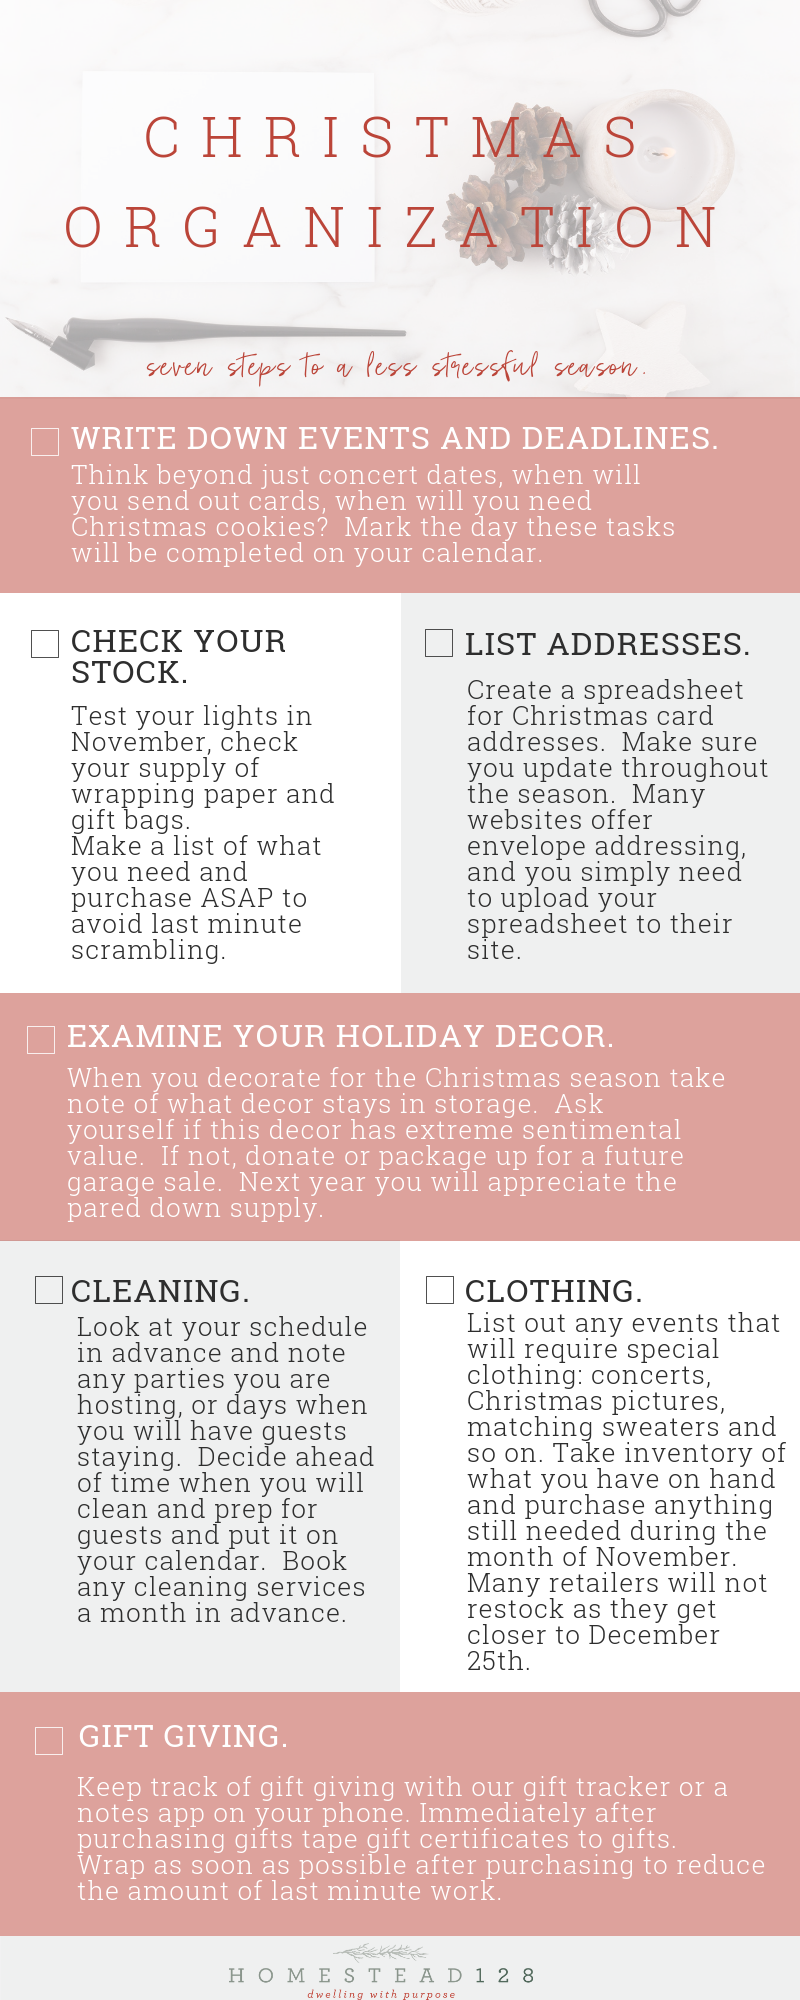 Christmas well organized - take action now for a less stressful December.